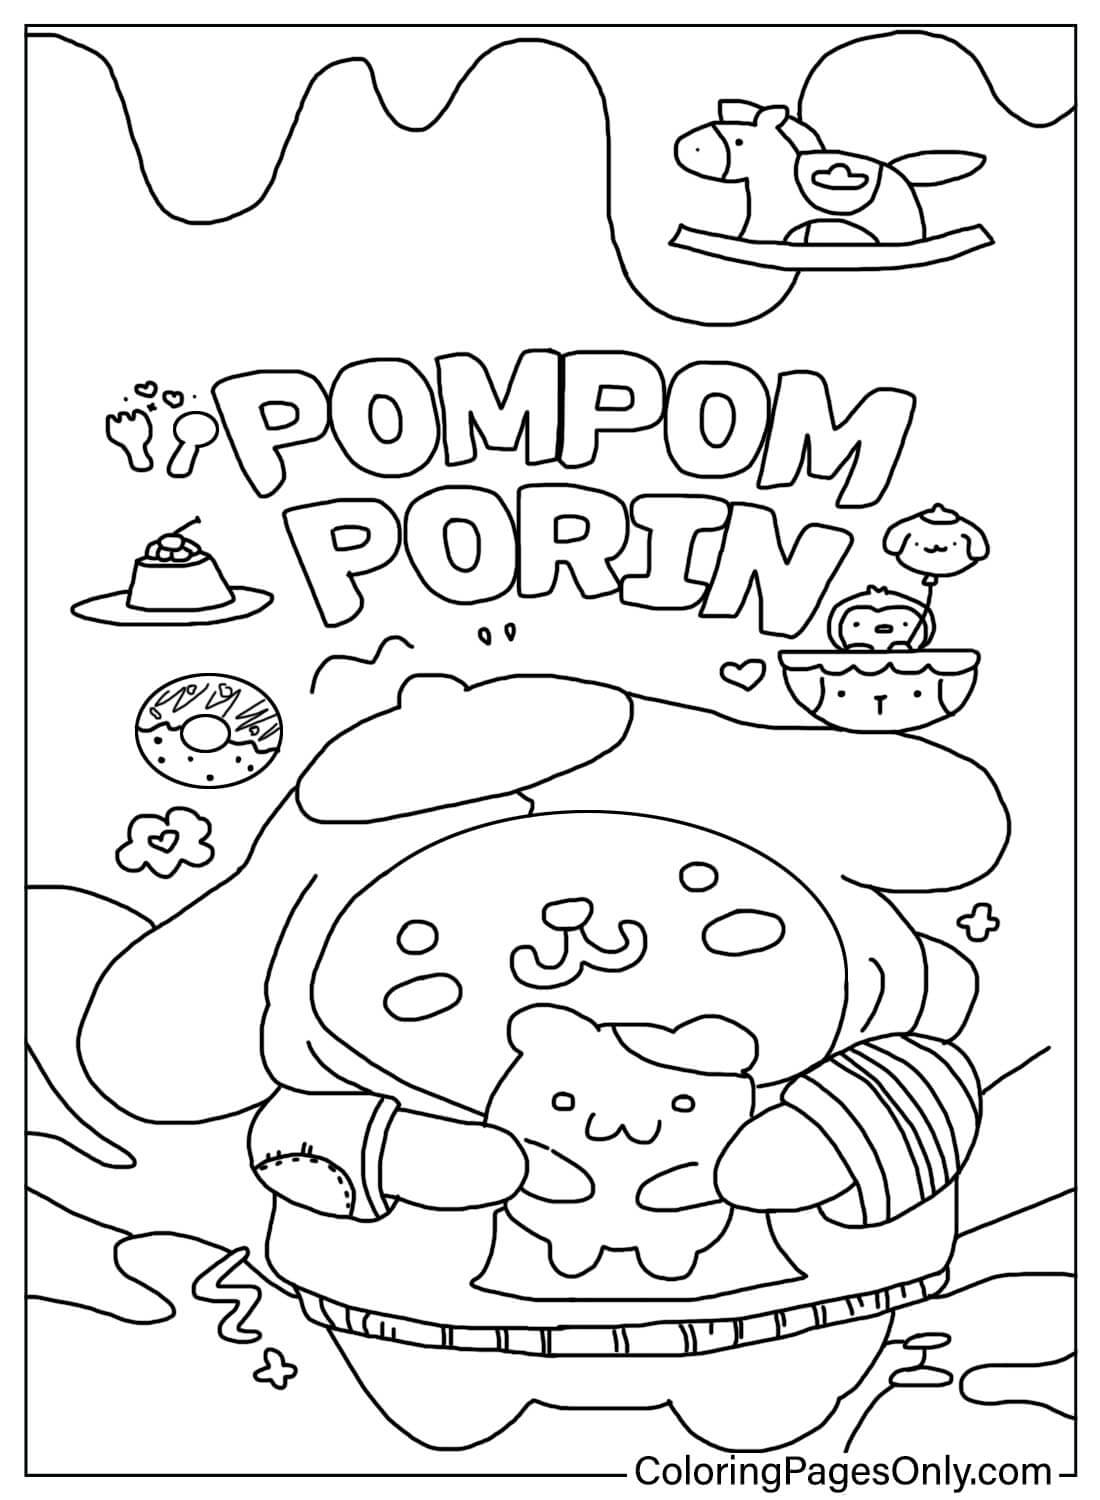 Coloring Page Pompompurin For Kids from Pompompurin